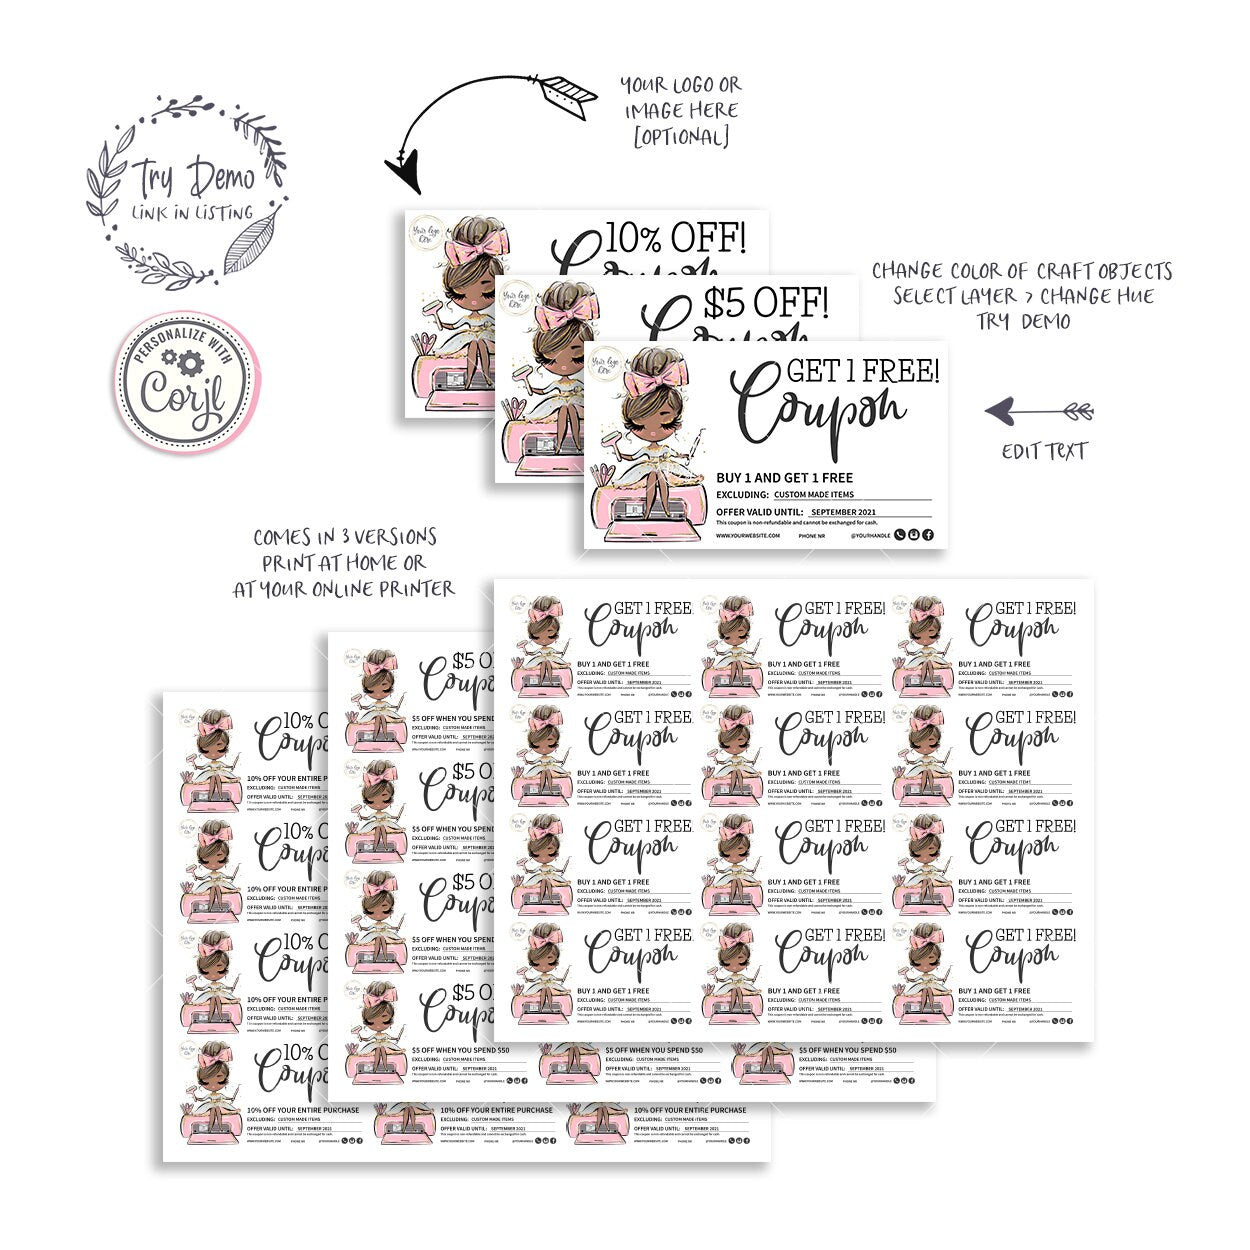 Handcrafter Business Coupons, Craft Shop Gift Cards, Brown Hair, Dark Skin - Candy Jar Studios